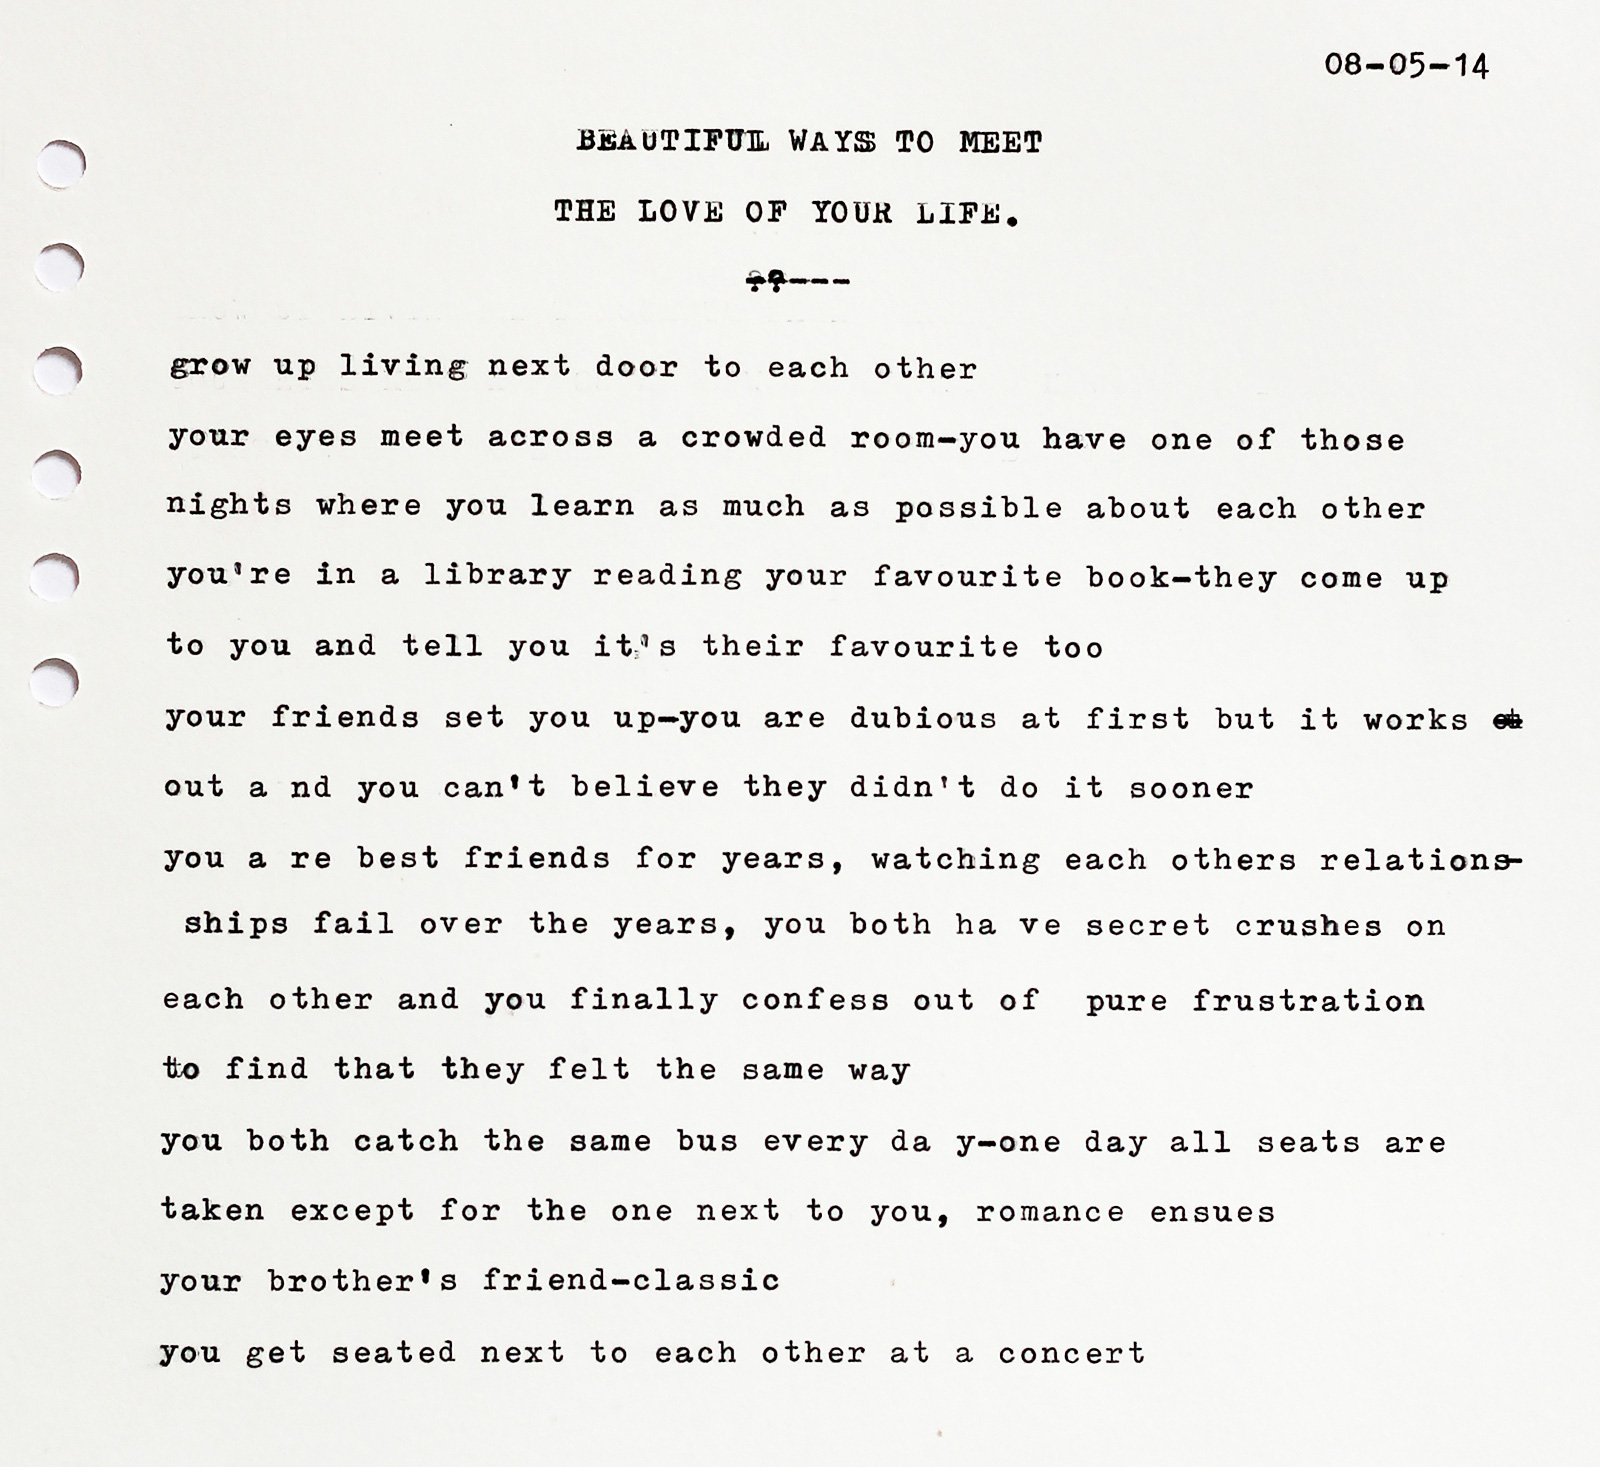 The Typewriter Sessions Volume 3: Beautiful Ways to Meet the Love of Your Life